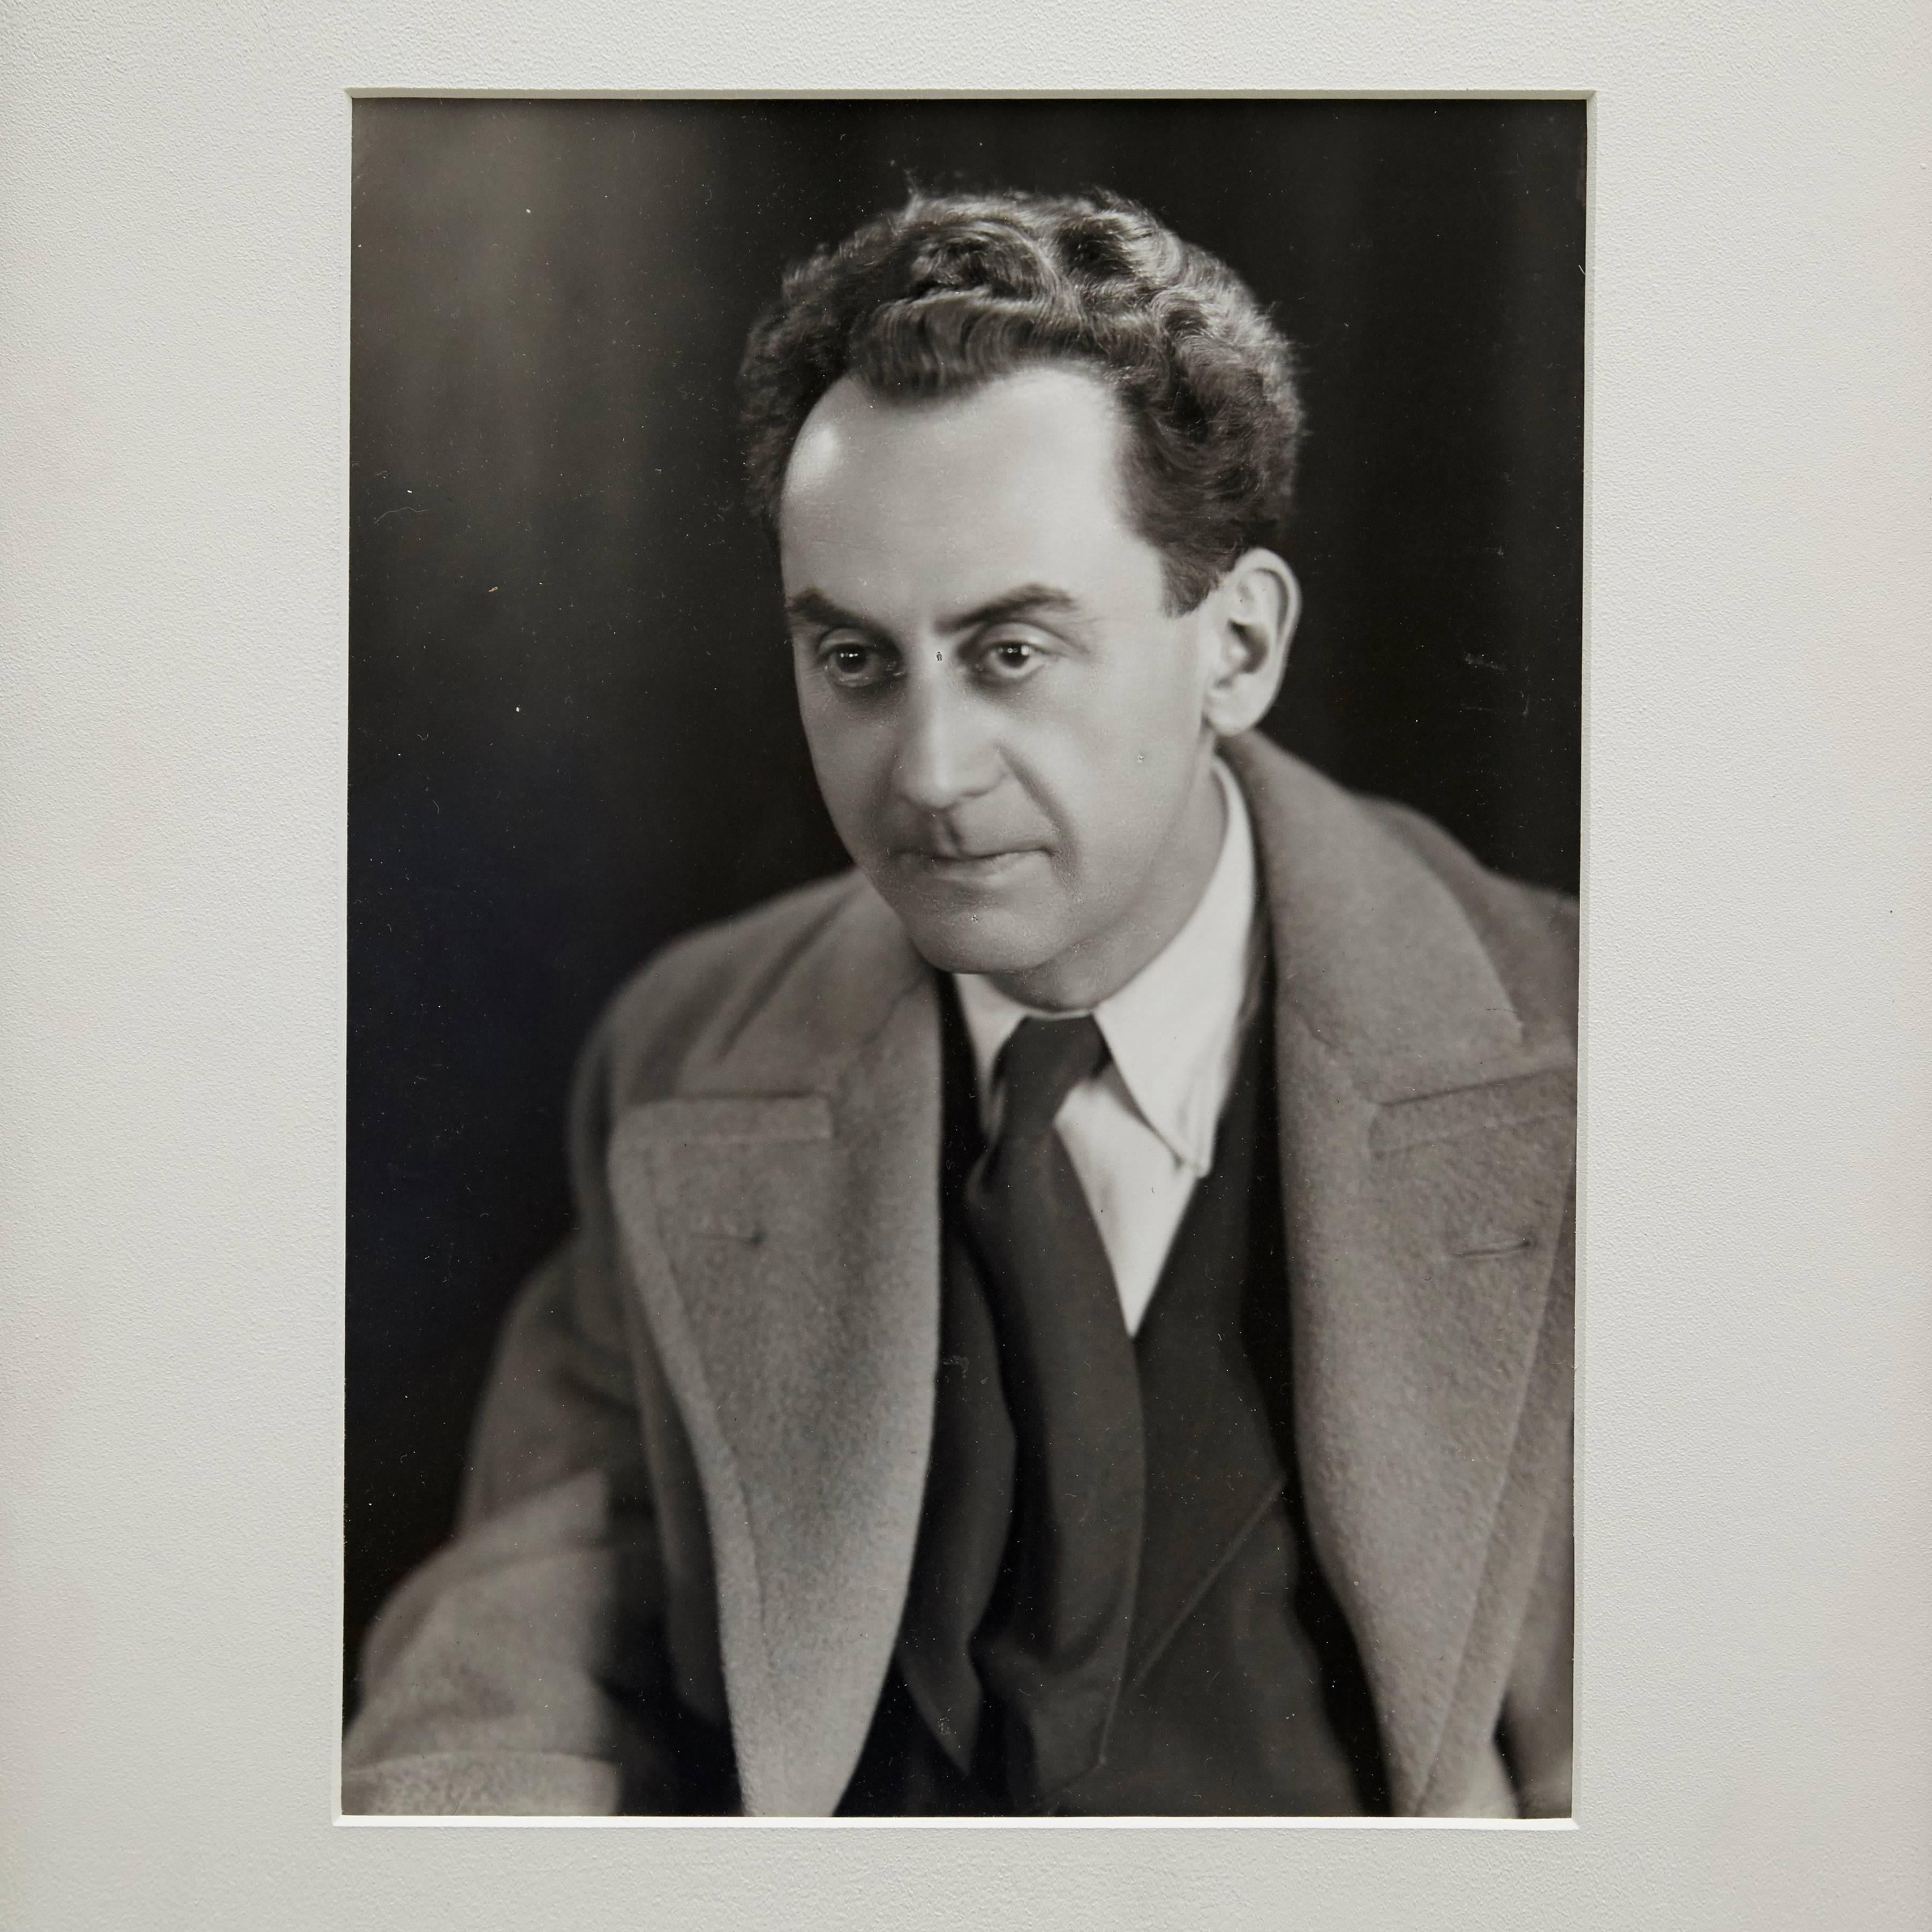 Selfportrait photographed by Man Ray.

A posthumous print from the original negative around 1970 by Pierre Gassmann. Gelatin silver bromide.

Framed in a 19th century frame with museum glass.

Stamped in the back with Man Ray Paris Stamp and